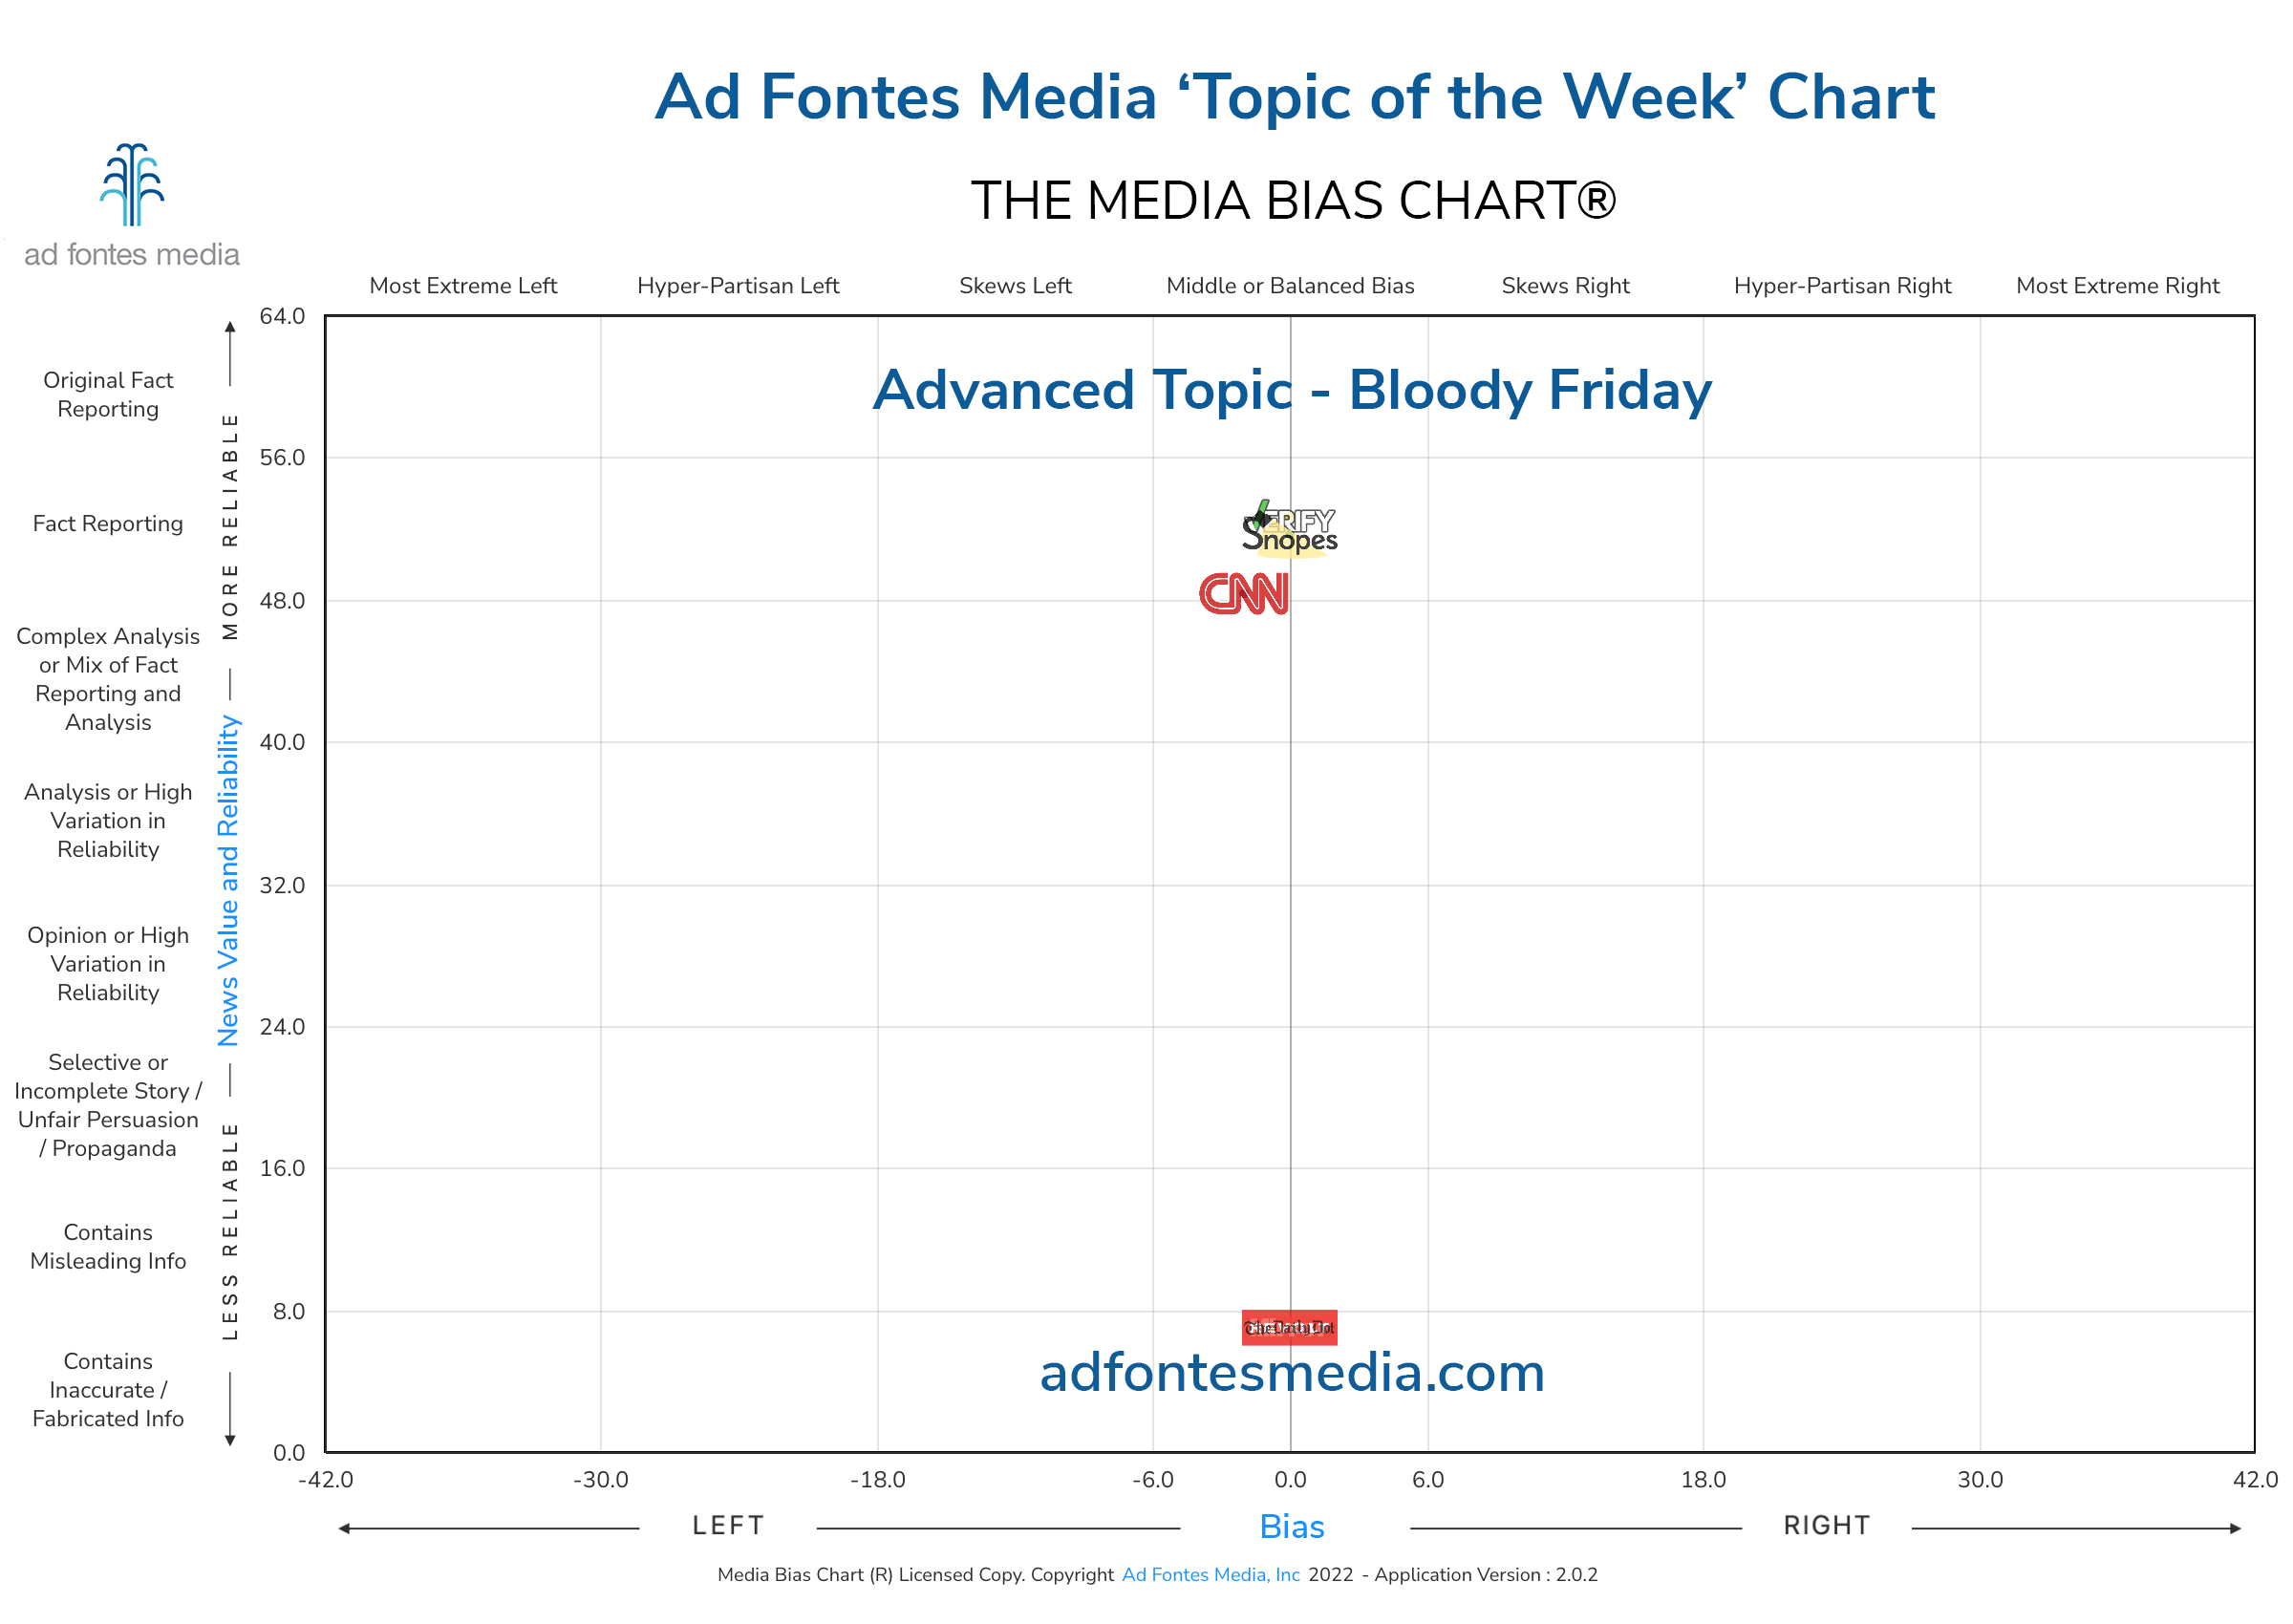 Scores of the Bloody Friday articles on the chart